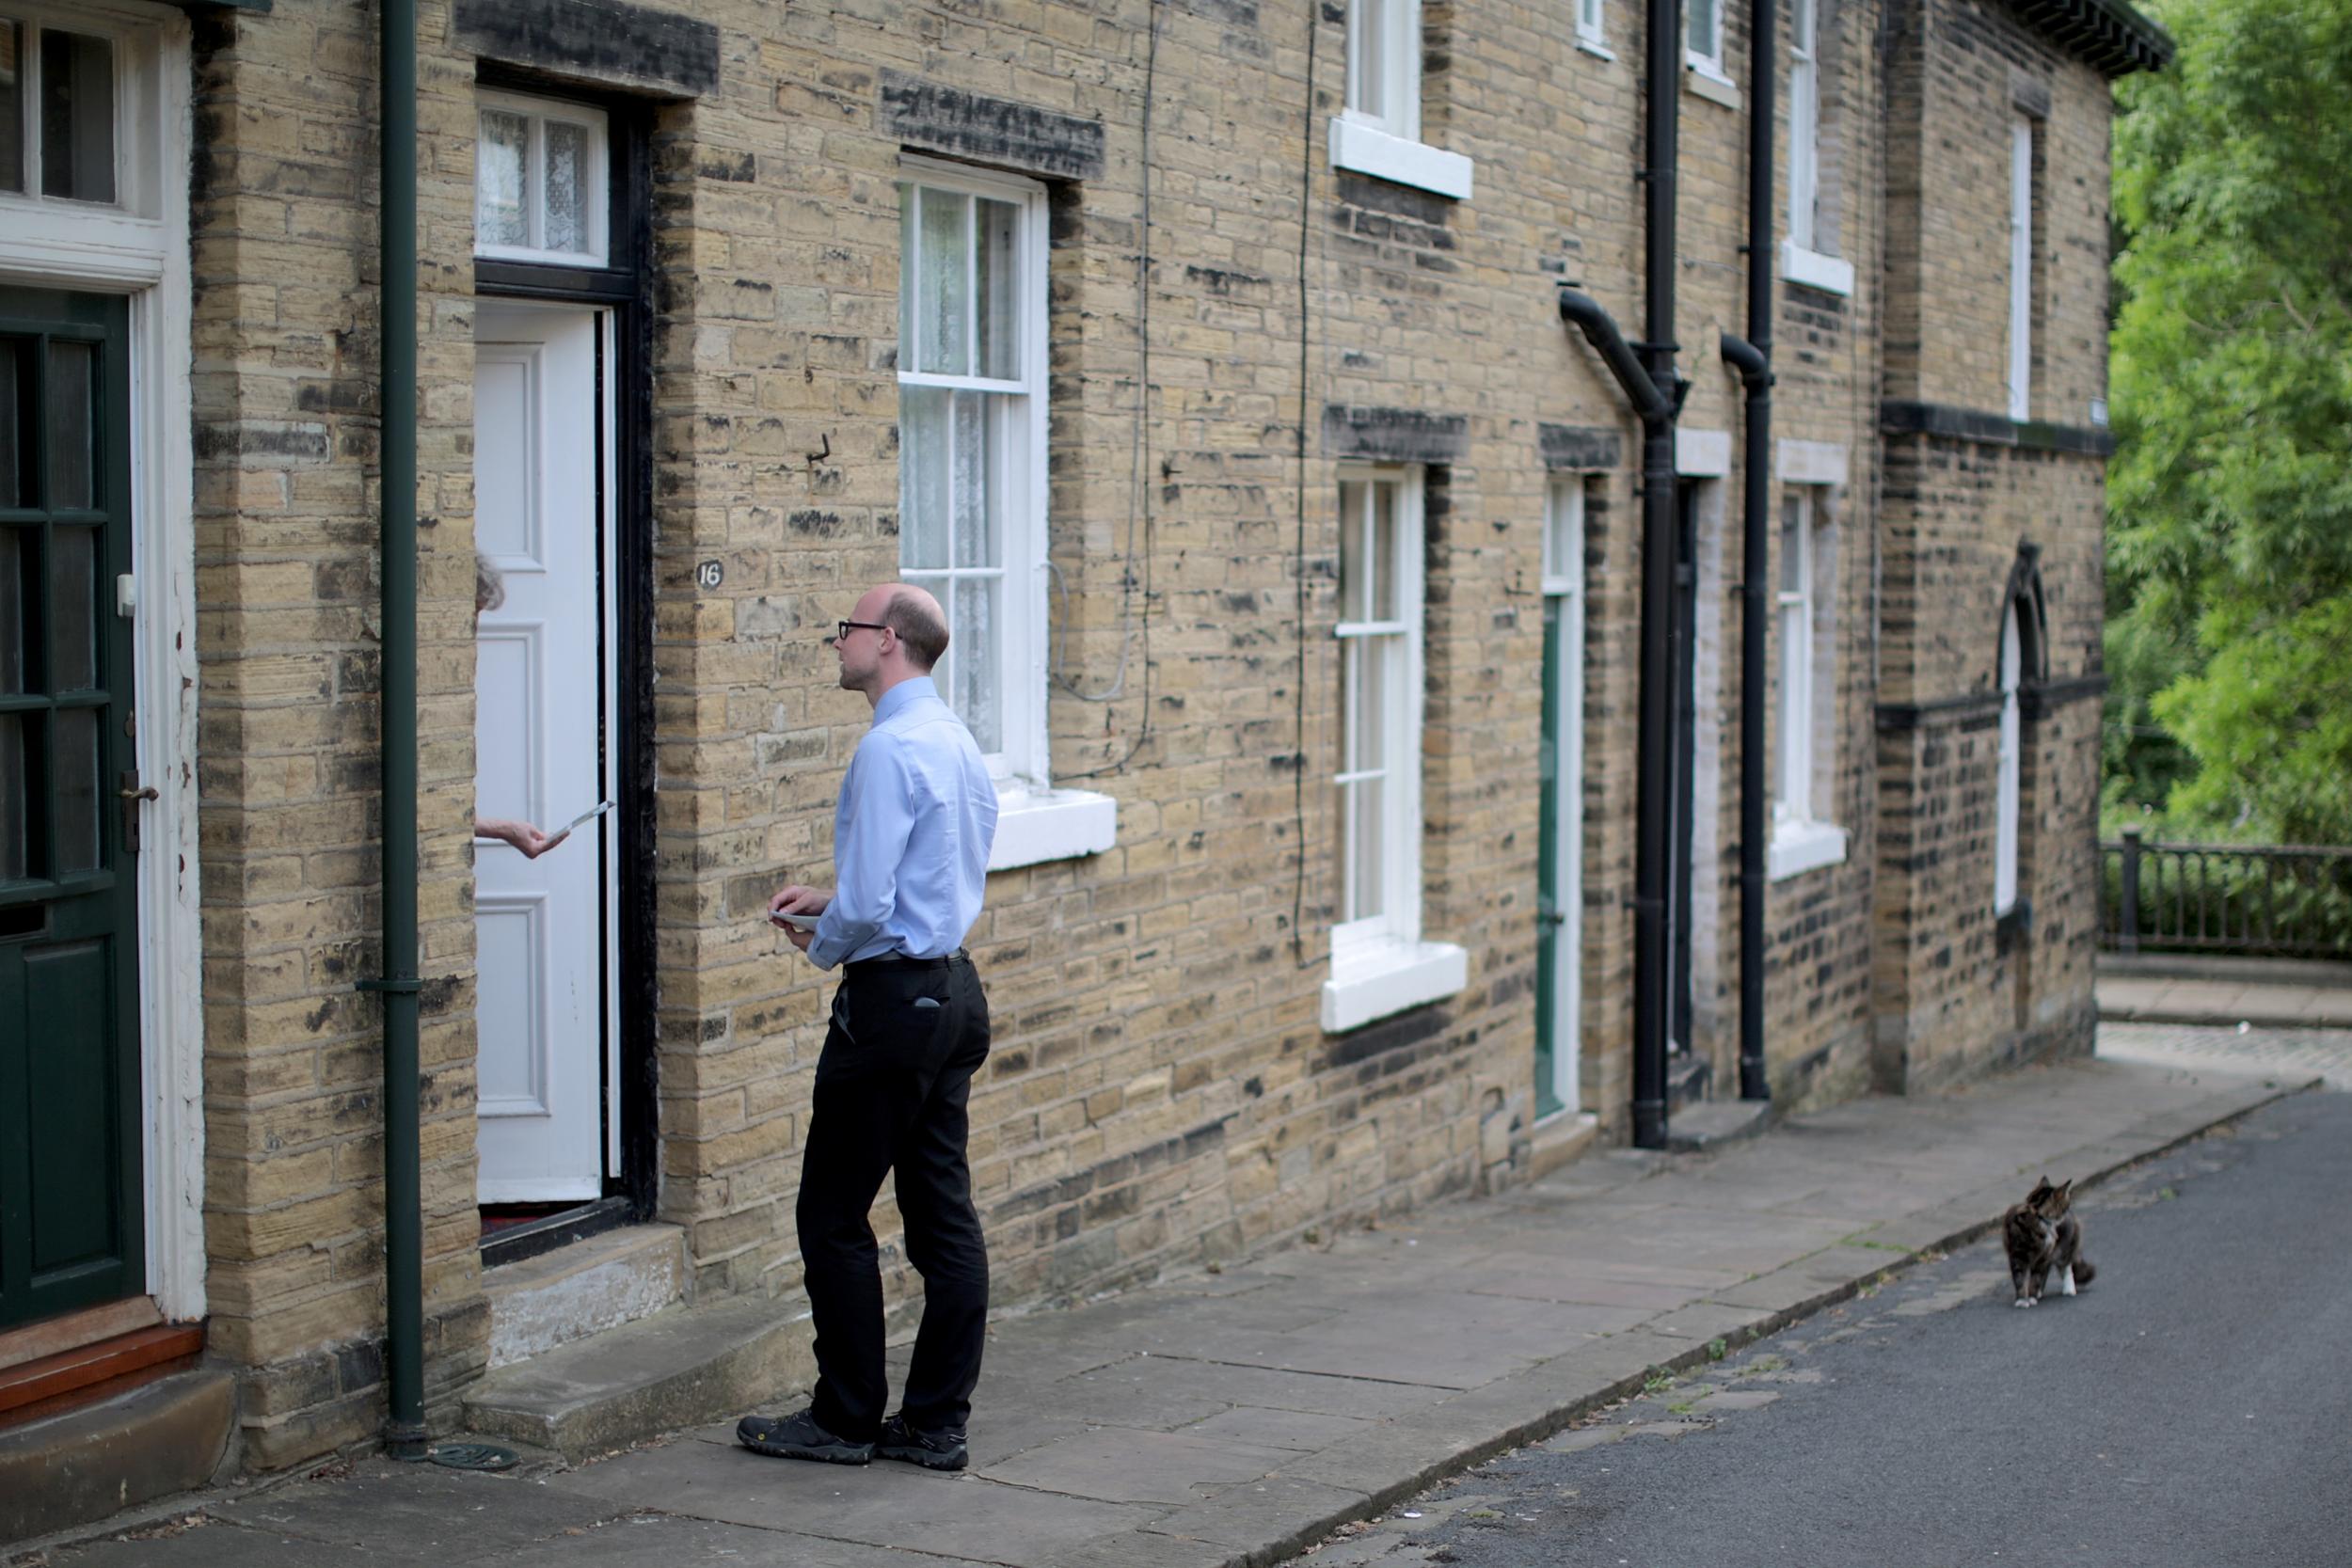 WEP supporter canvasses doorsteps in Shipley